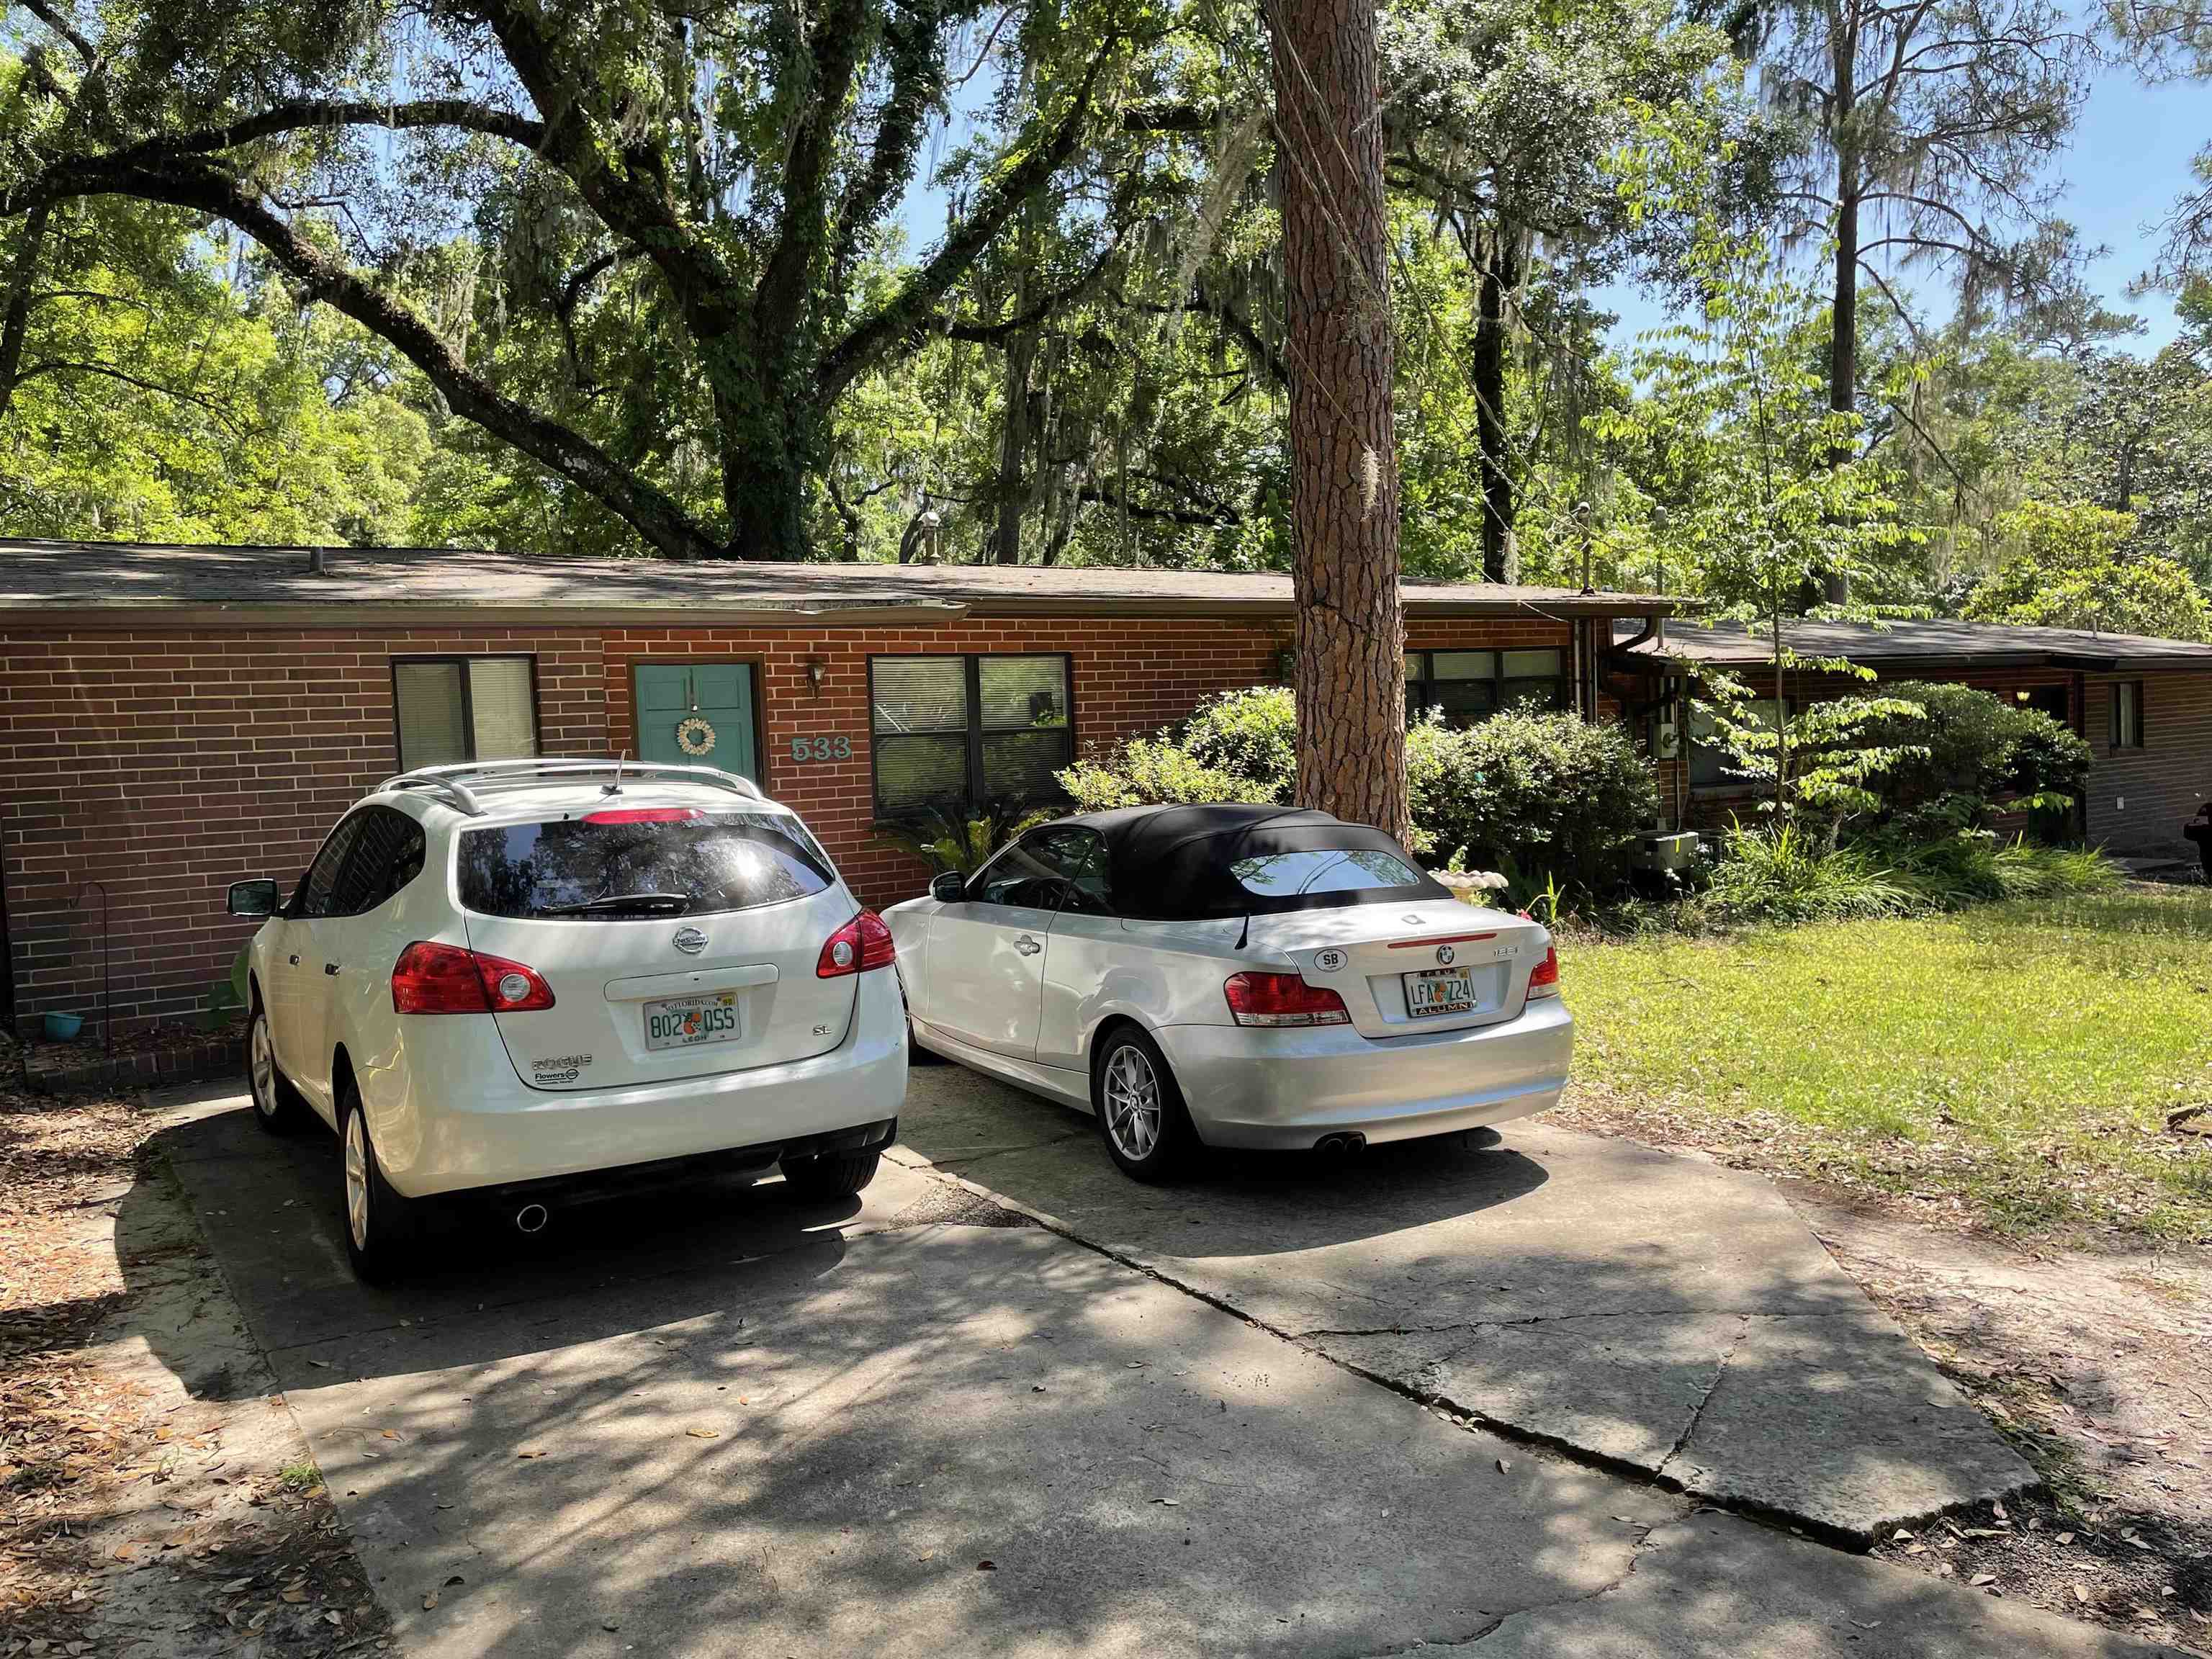 Bring your investors! This is the rarest one of all! All brick duplex with a separate tiny home in the back, in PRIME Myers Park! Walk to Cascades Park and downtown within minutes. Close to FSU, FAMU, Greenwise, Gaines street shops, and more..... Each unit of the duplex is 3/2, while the adorable tiny home sits in the back, which has just been rented at market rent. Duplex units are under rented, with leases expiring soon. Super well maintained and has been cared for under property management. Adjoining parcel with similar duplex, as well as an apartment underneath rather than a tiny home in the back, is also listed for sale. Roof 2014. Don't miss this opportunity to have a prime investment location in the heart of Tallahassee. Bring your offers! Pictures other than tiny home are older and limited. Newer ones will be coming soon. All measurements are approximate and should be independently reviewed and verified for accuracy.